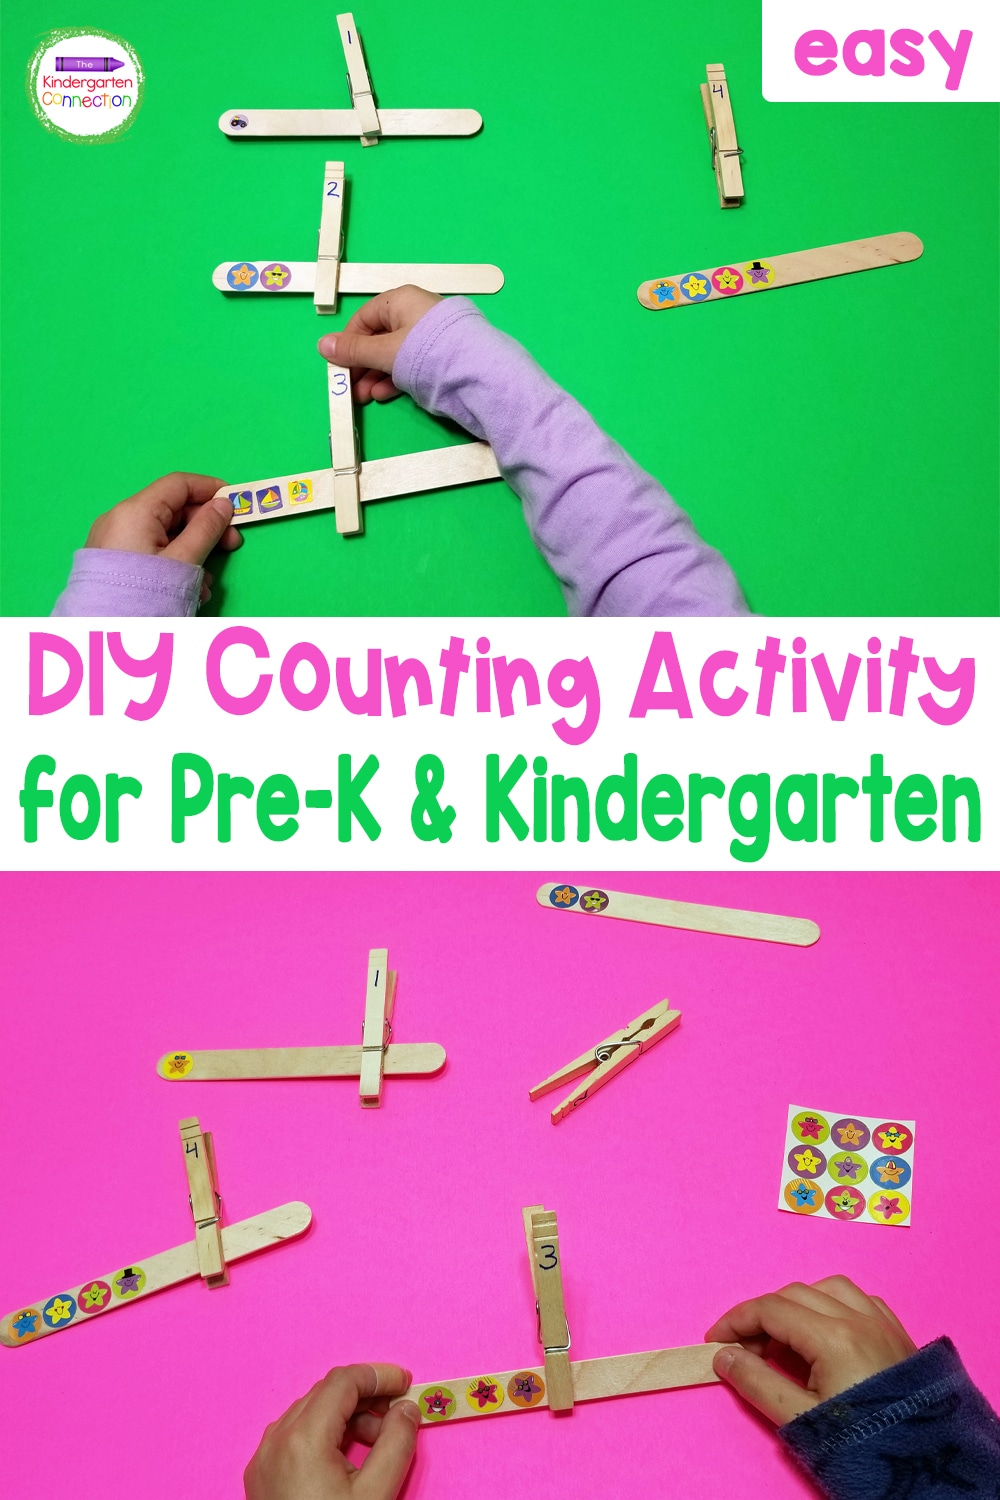 This Easy DIY Counting Activity is great for practicing counting and fine motor skills in Pre-K & Kindergarten. Customize it for any season!